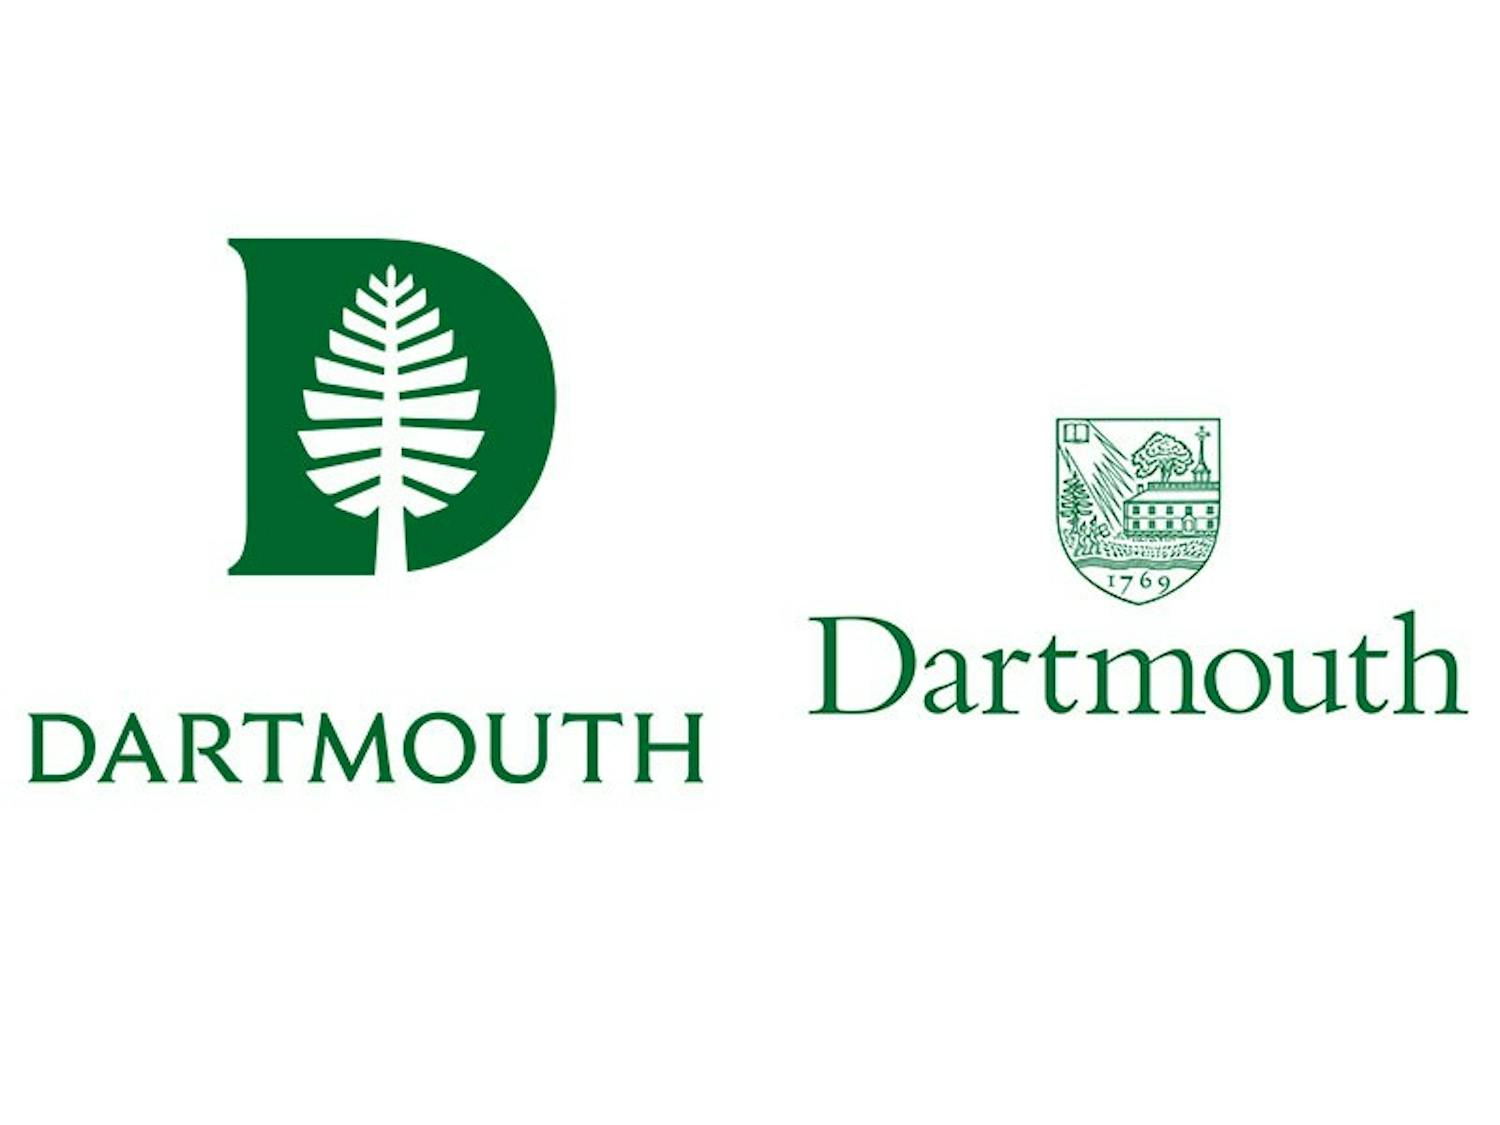 Dartmouth's new logo and typeface (left) is replacing its previous branding materials (right).